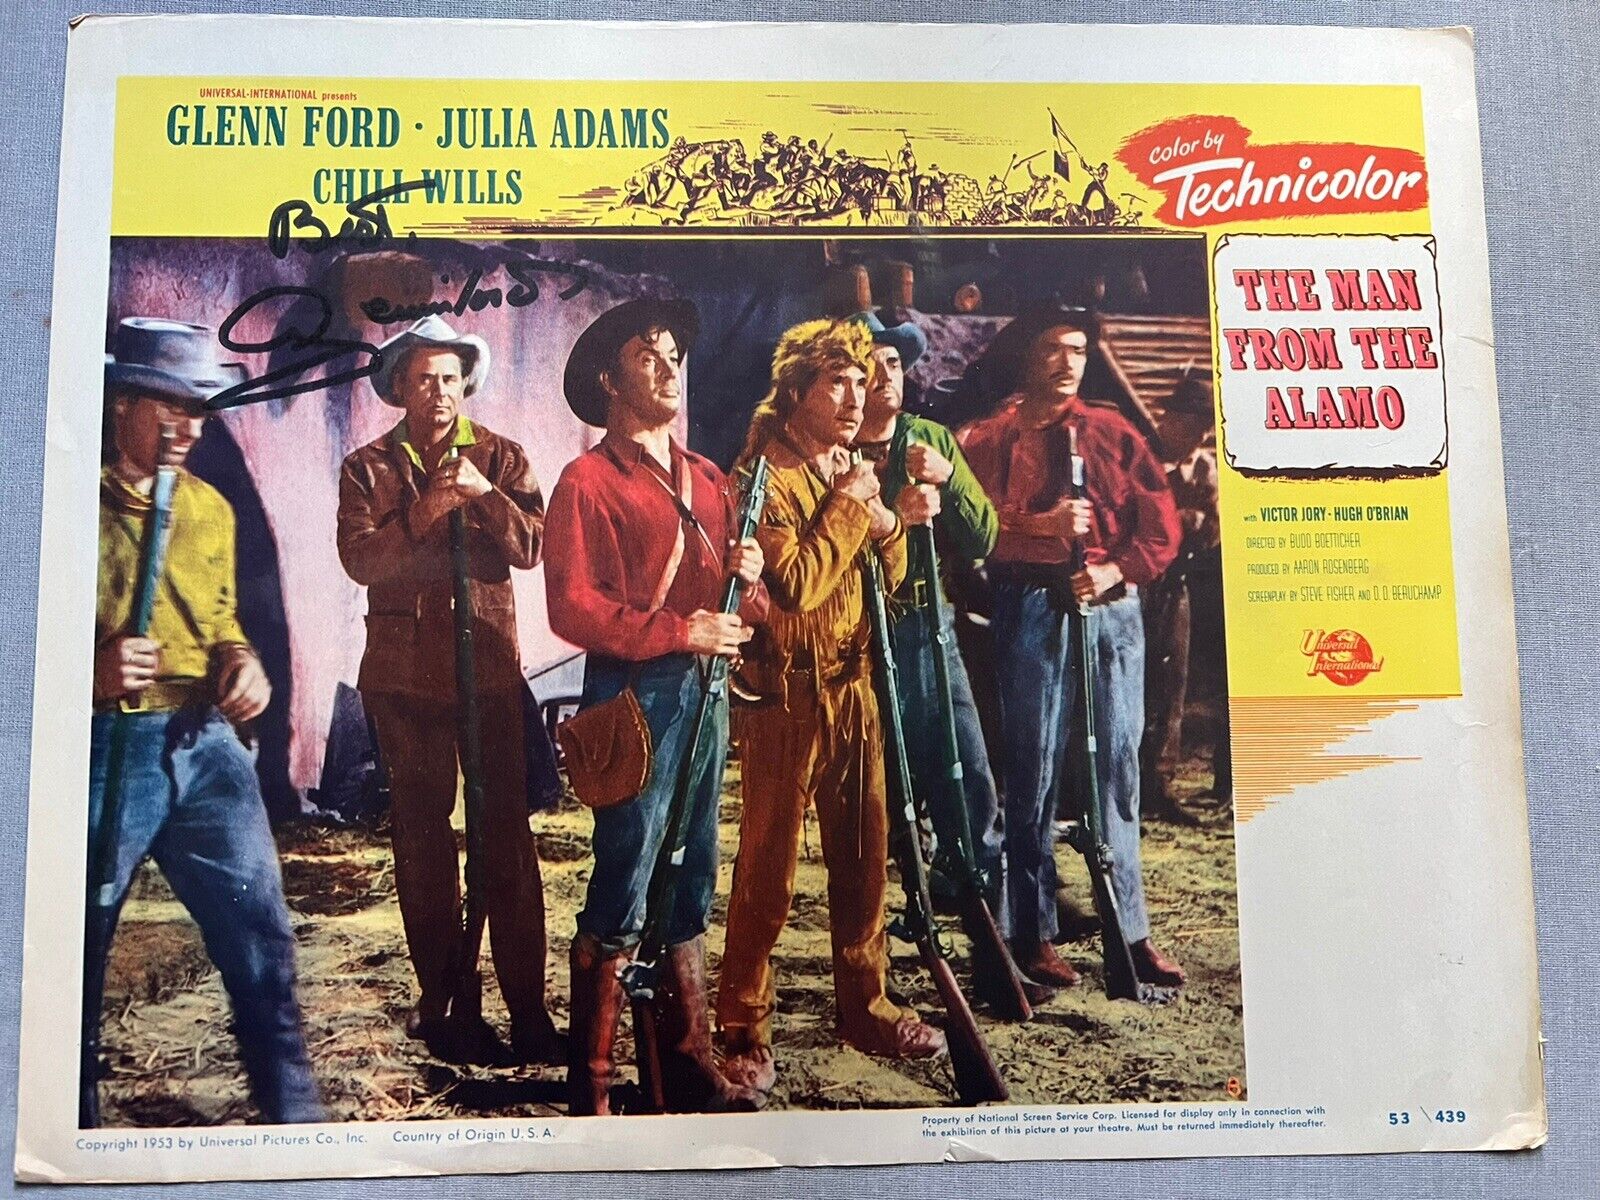 RARE The Man From The Alamo Original Lobby Card Signed By Glenn Ford